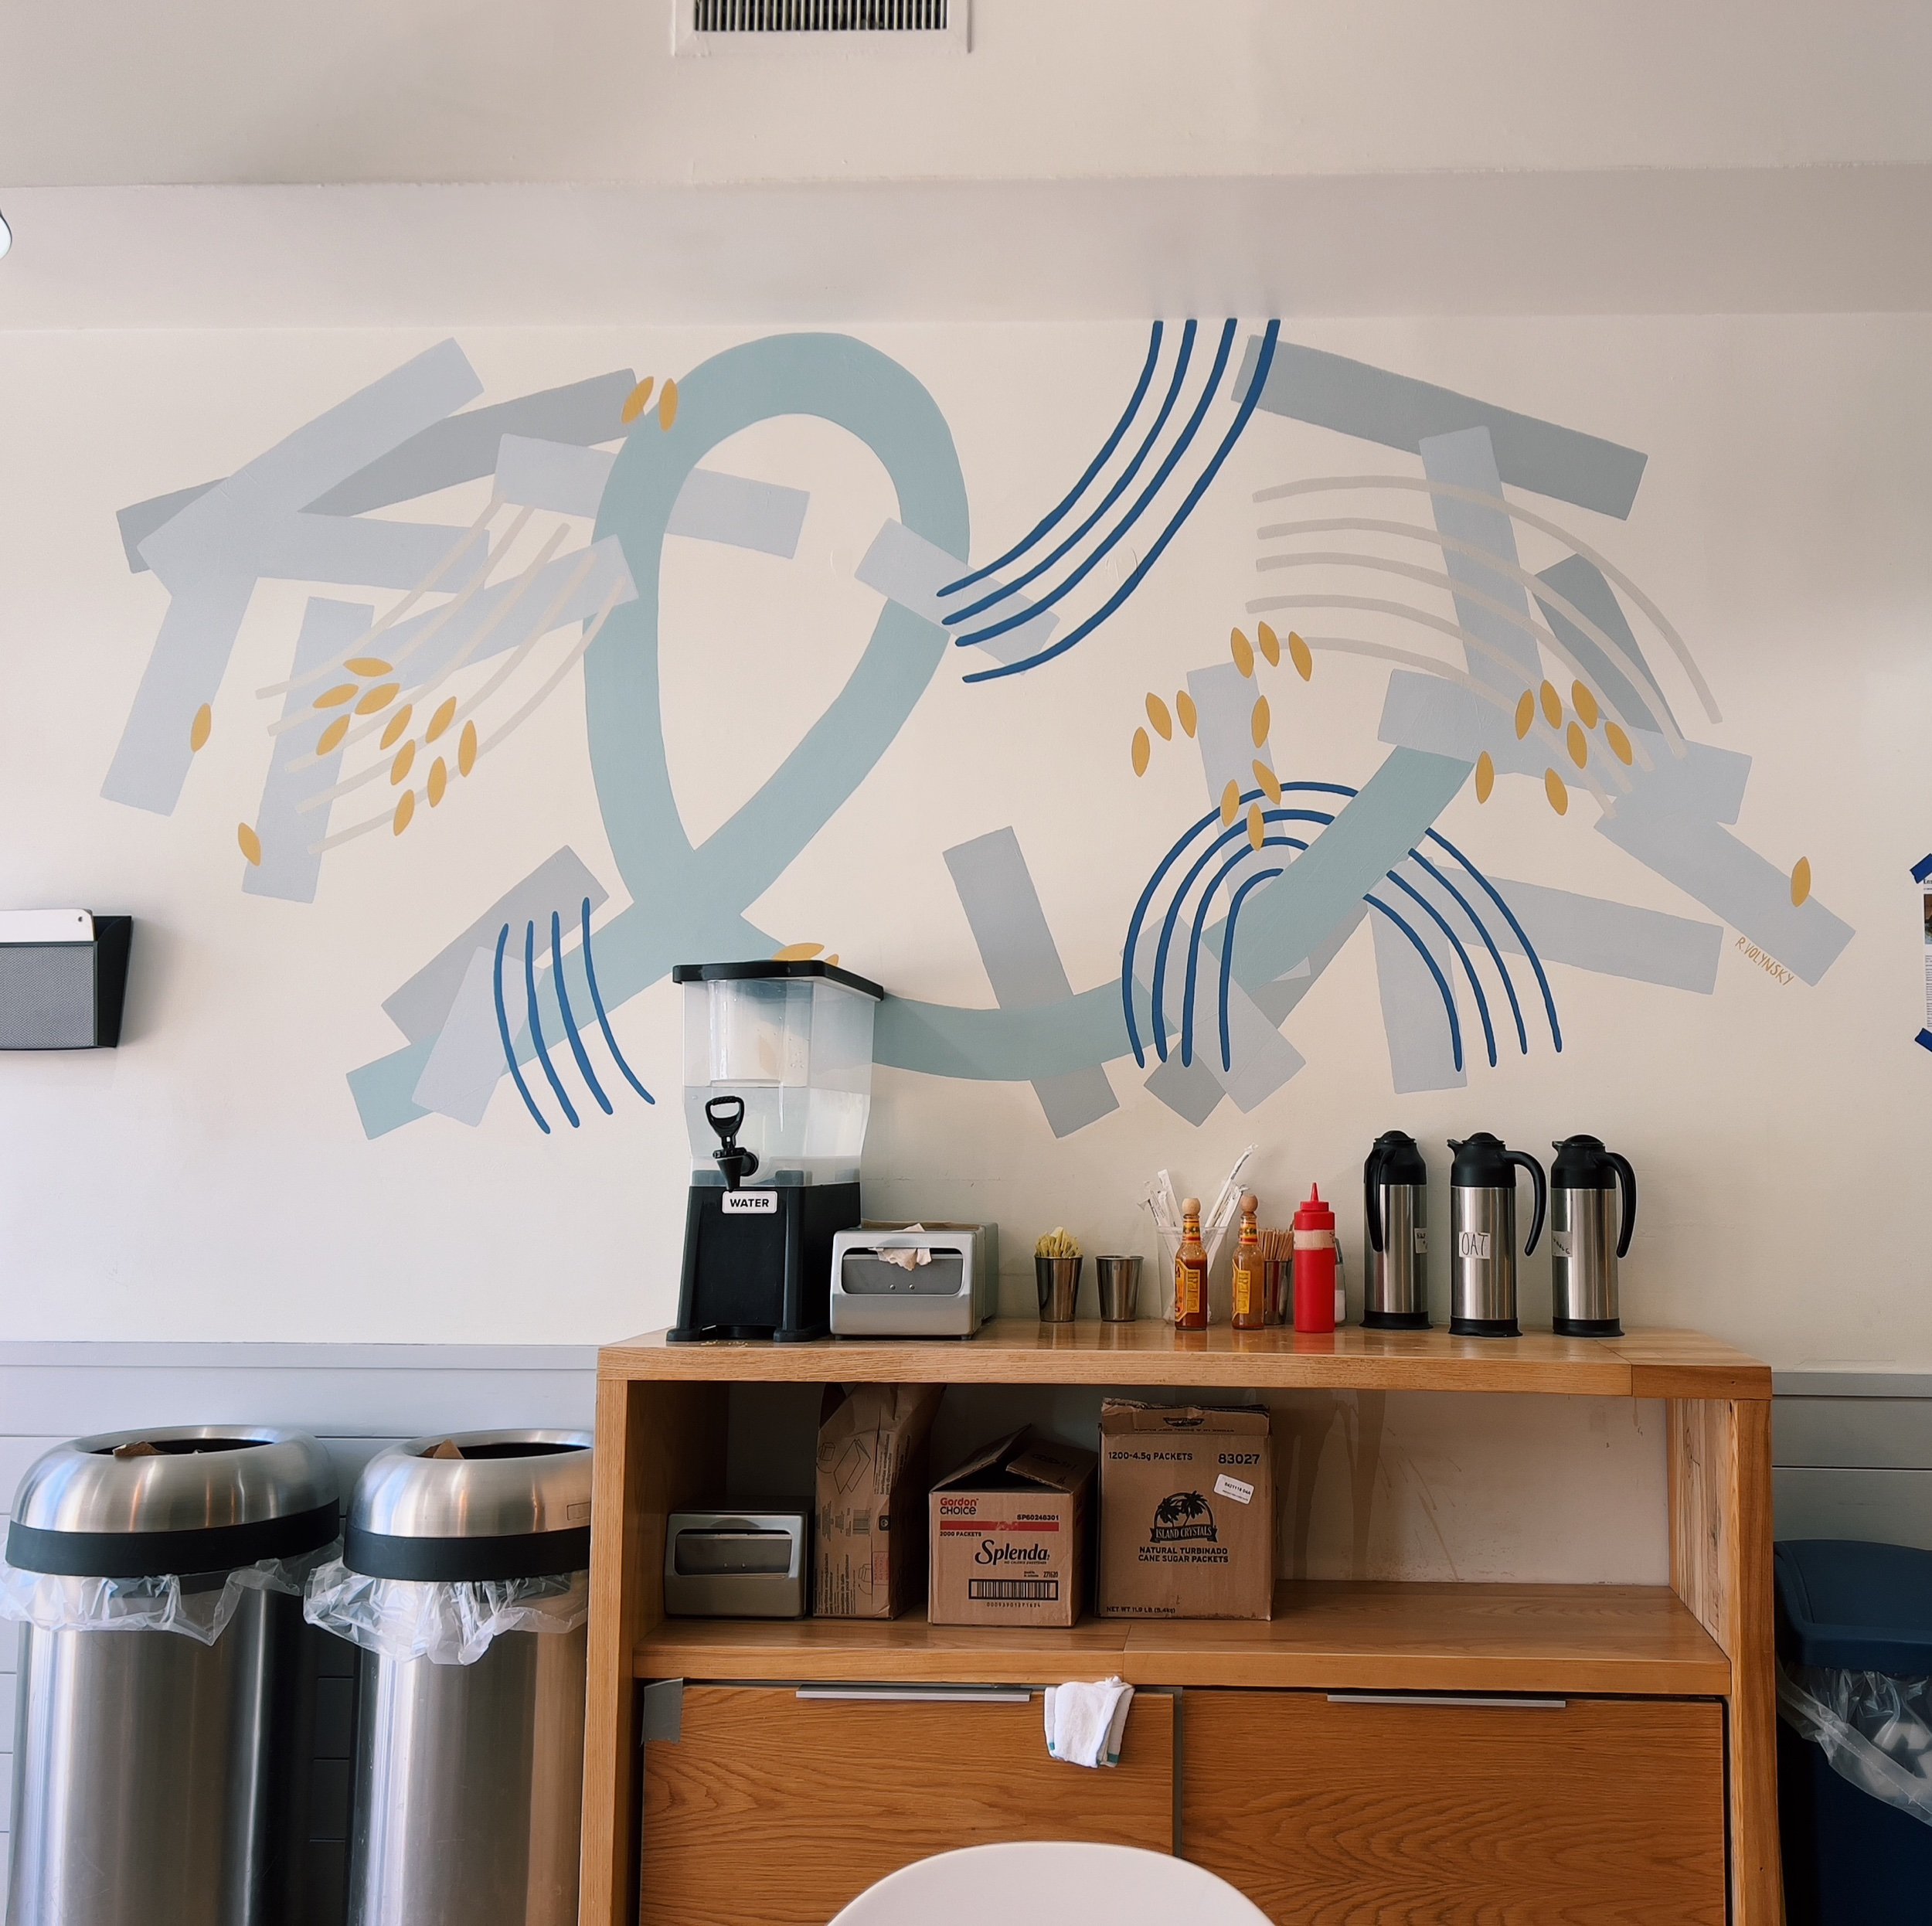  Commissioned mural for Bagelsaurus in Cambridge, MA This piece was designed and painted by hand in July 2019. 